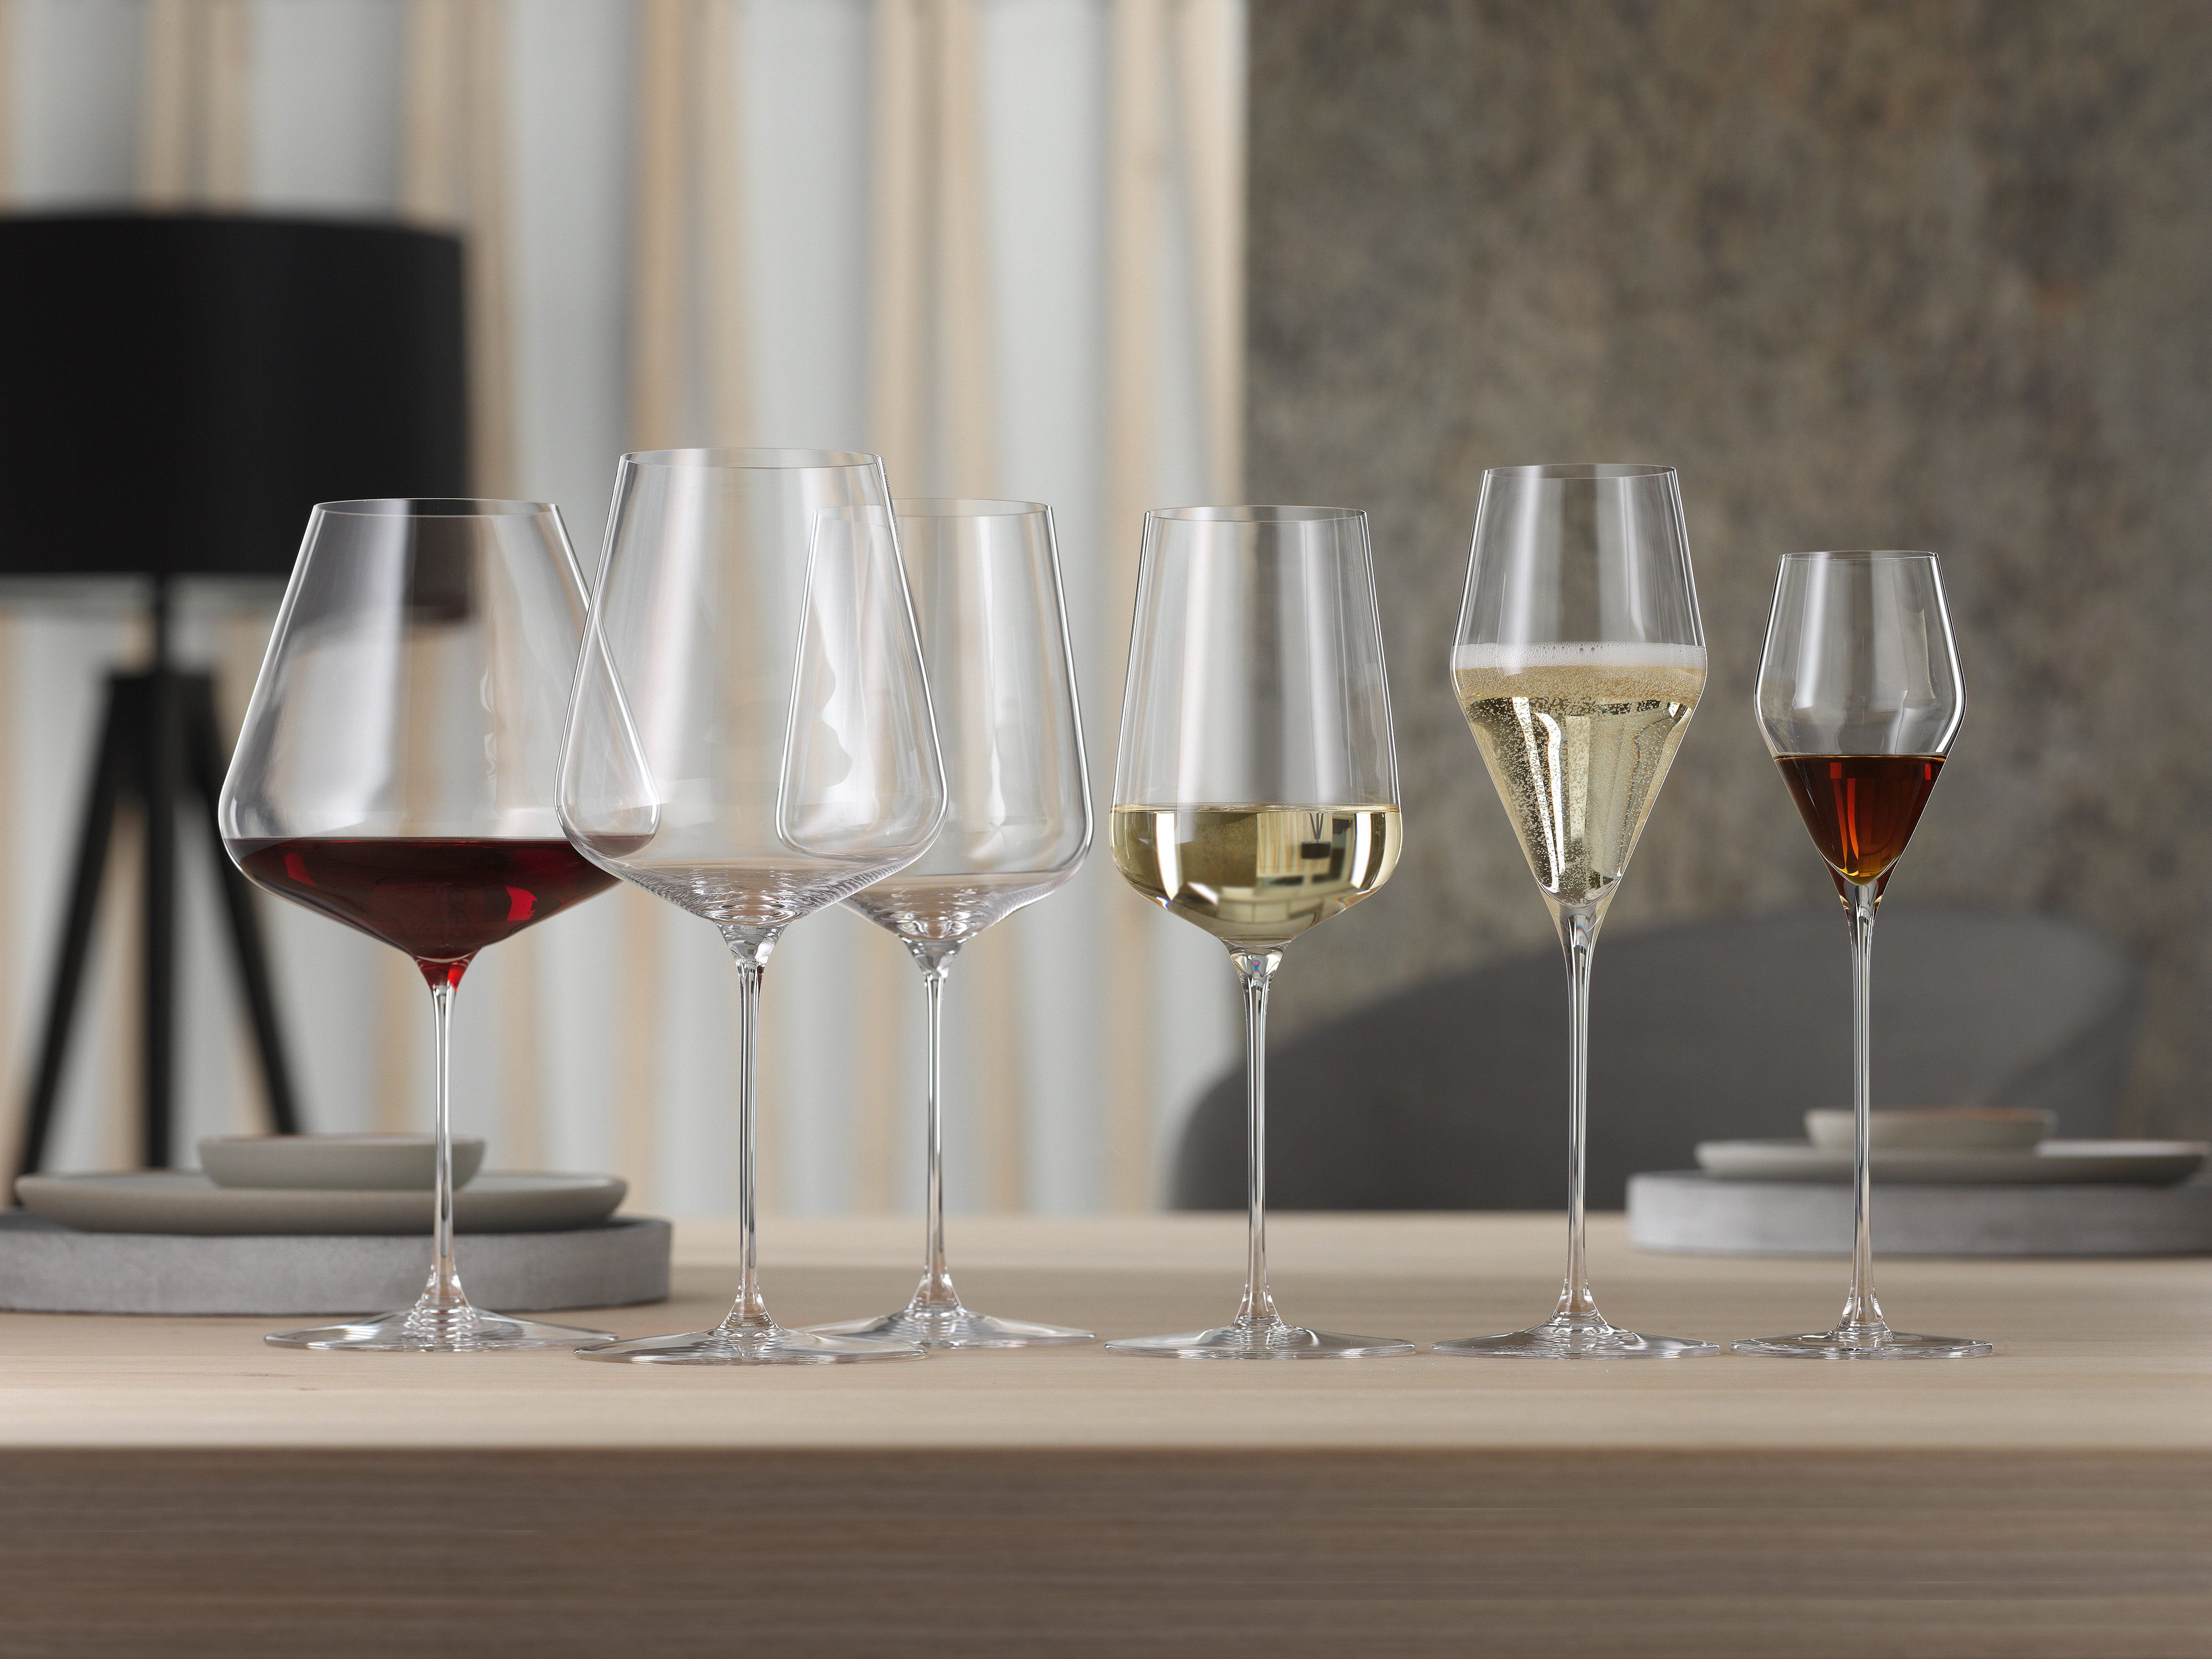 https://www.nordicnest.com/assets/blobs/spiegelau-definition-champagne-glass-25-cl-2-pack-clear/514348-01_7_EnvironmentImage-99aab30329.jpeg